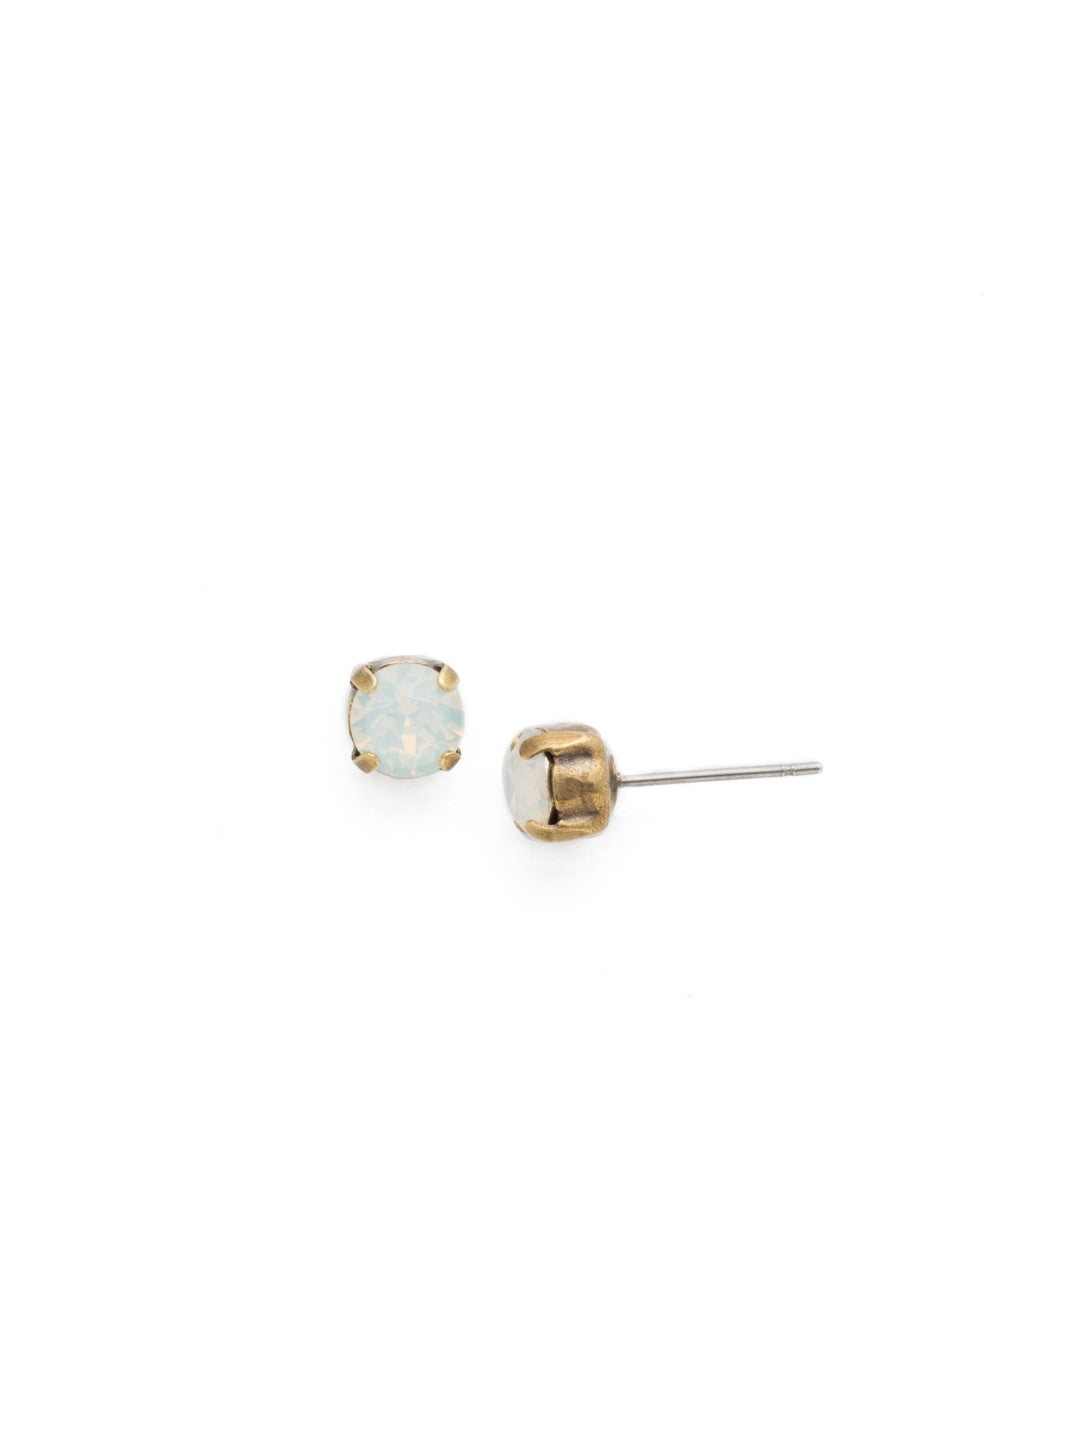 Jayda Stud Earrings - EDN32AGWO - <p>The Jayda Stud Earrings are the perfect every day wardrobe staple. A round crystal nestles perfectly in a metal plated post with four prongs. </p><p>Need help picking a stud? <a href="https://www.sorrelli.com/blogs/sisterhood/round-stud-earrings-101-a-rundown-of-sizes-styles-and-sparkle">Check out our size guide!</a> From Sorrelli's White Opal collection in our Antique Gold-tone finish.</p>